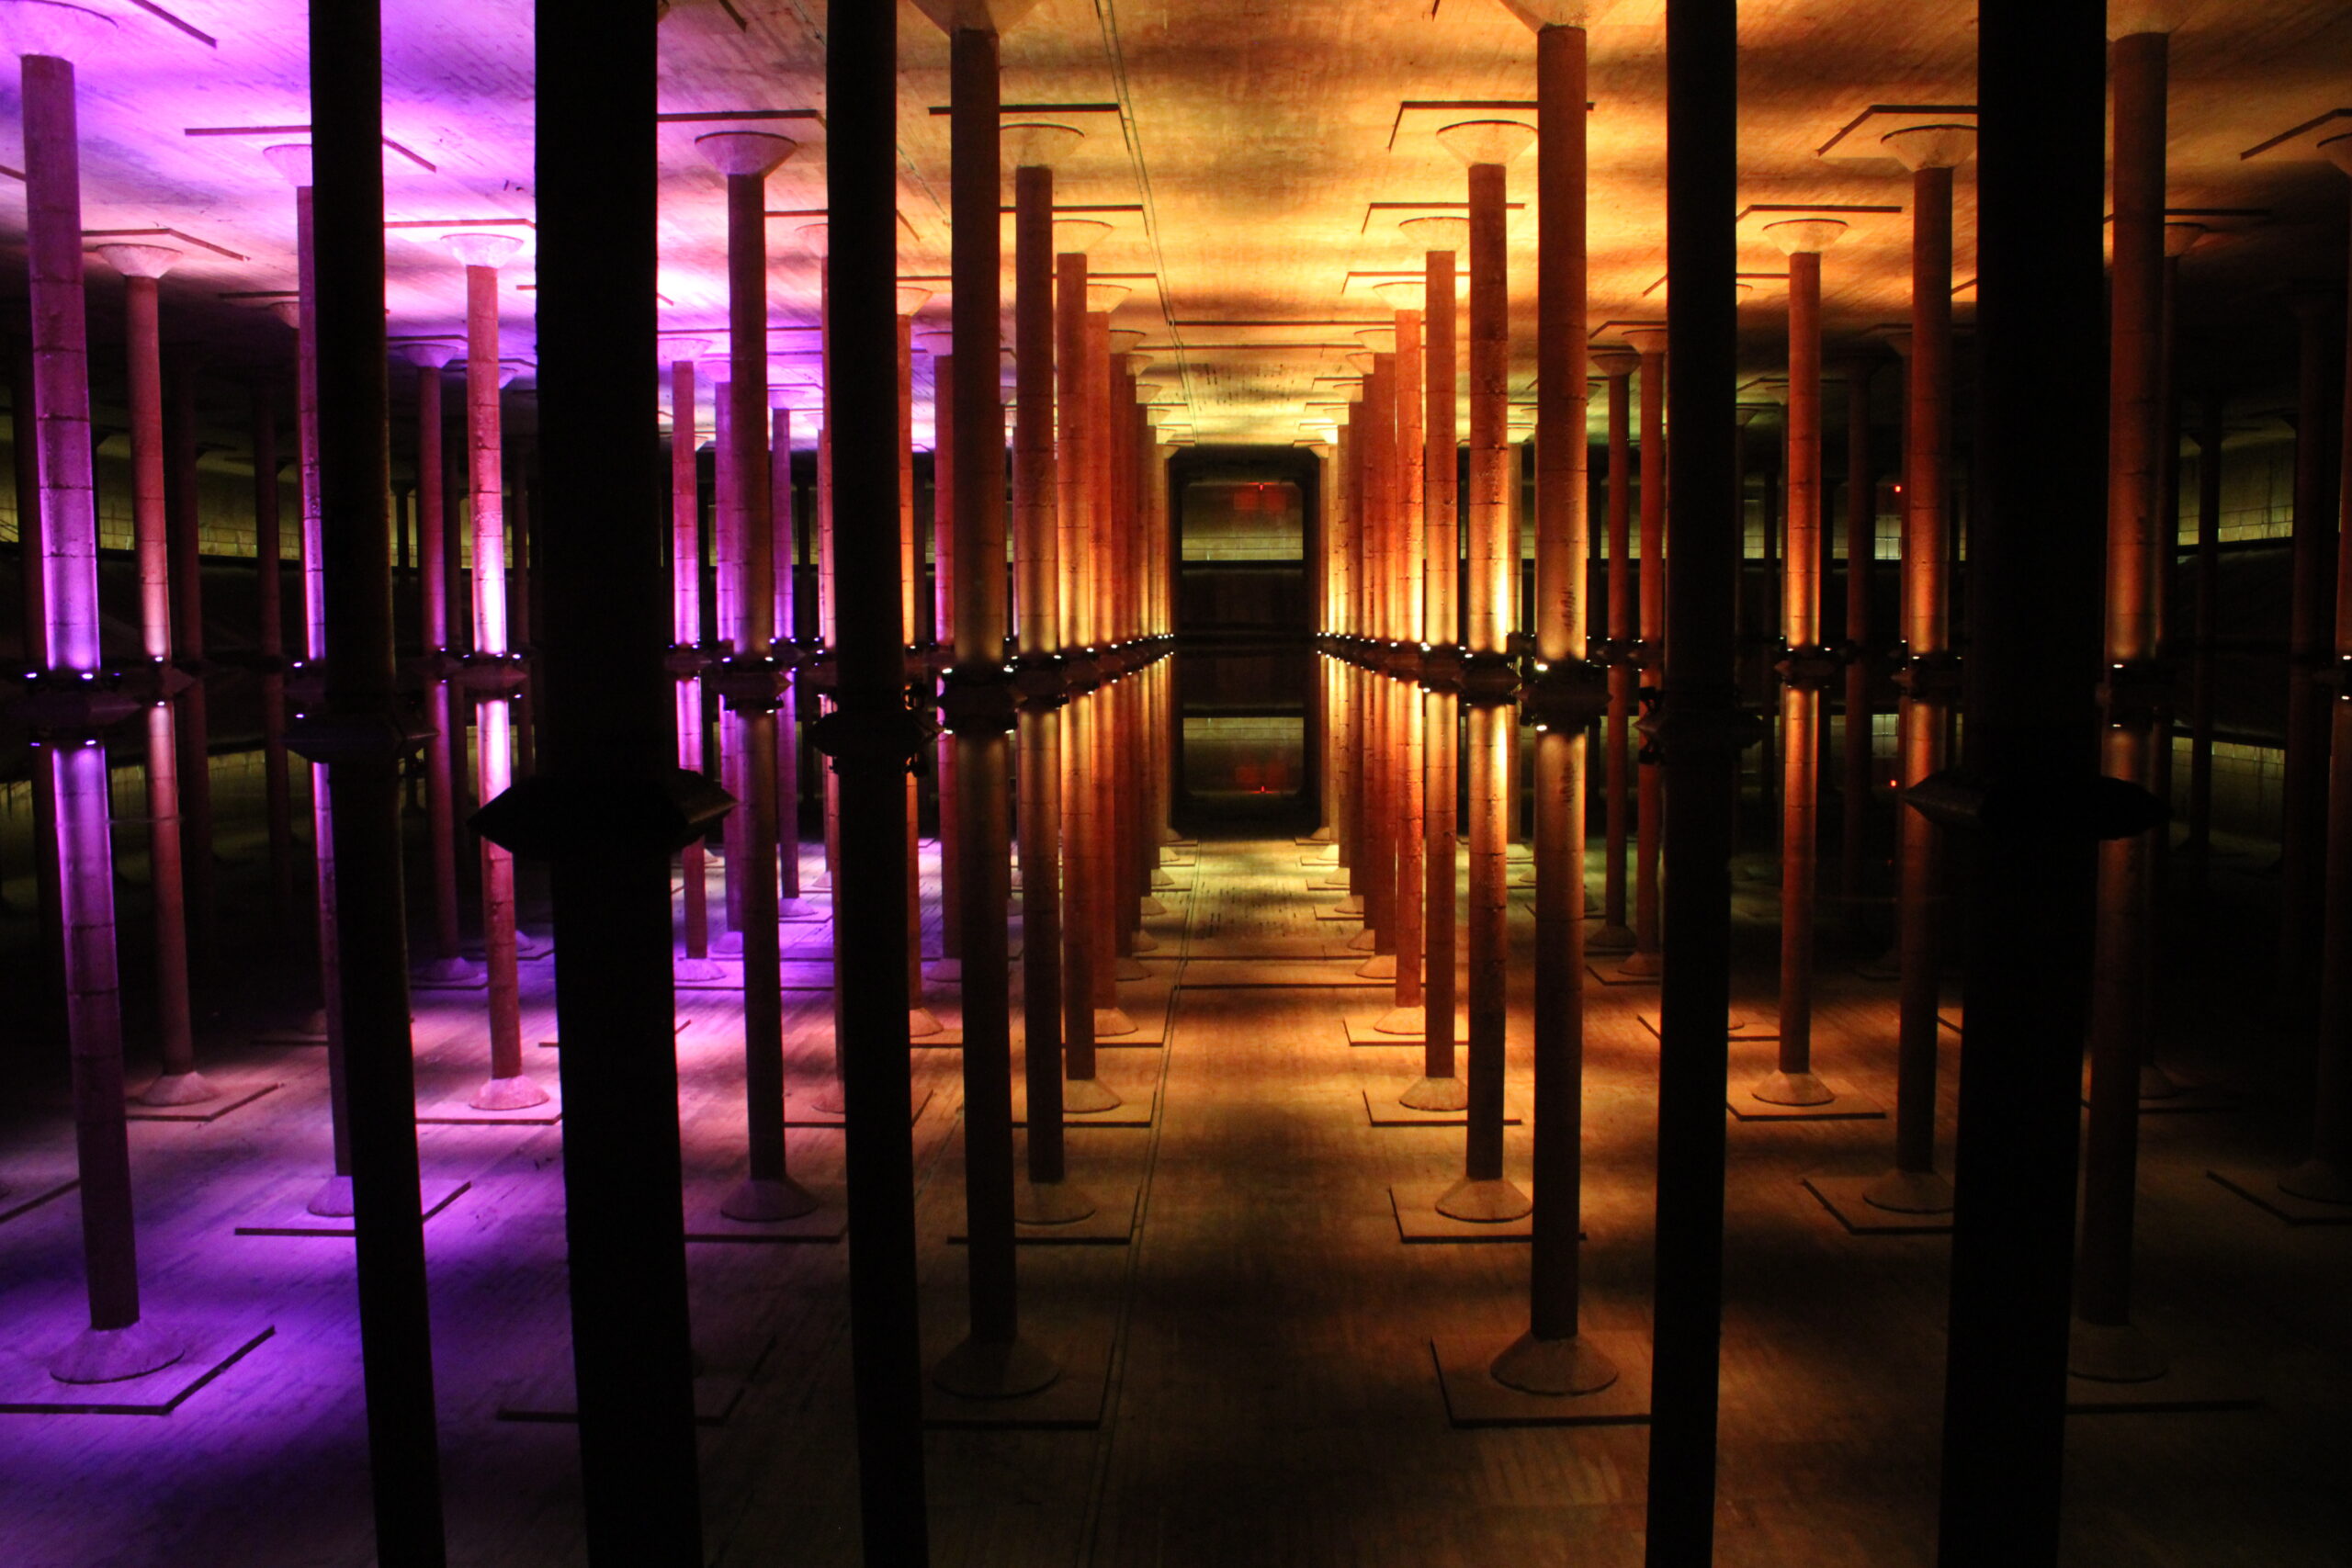 Image SOLD OUT: Cistern Illuminated: Sights and Sounds Meditation